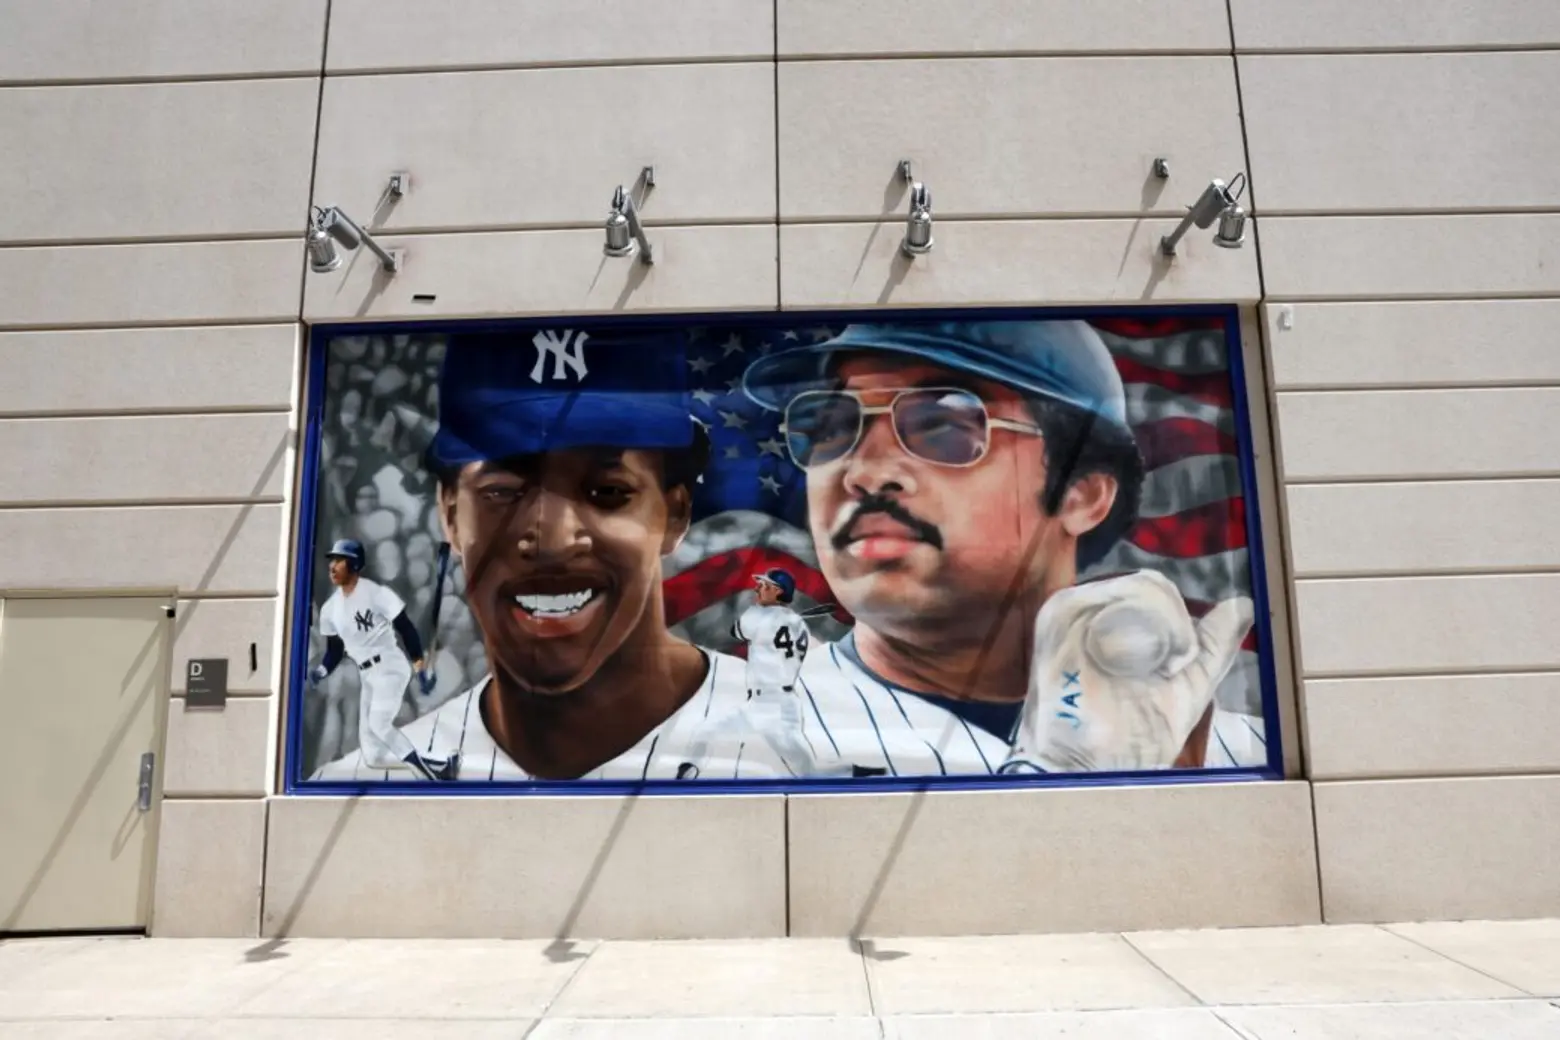 NEW YORK YANKEES HONOR BLACK LEGENDS WITH MURALS. PART 1 OF 3